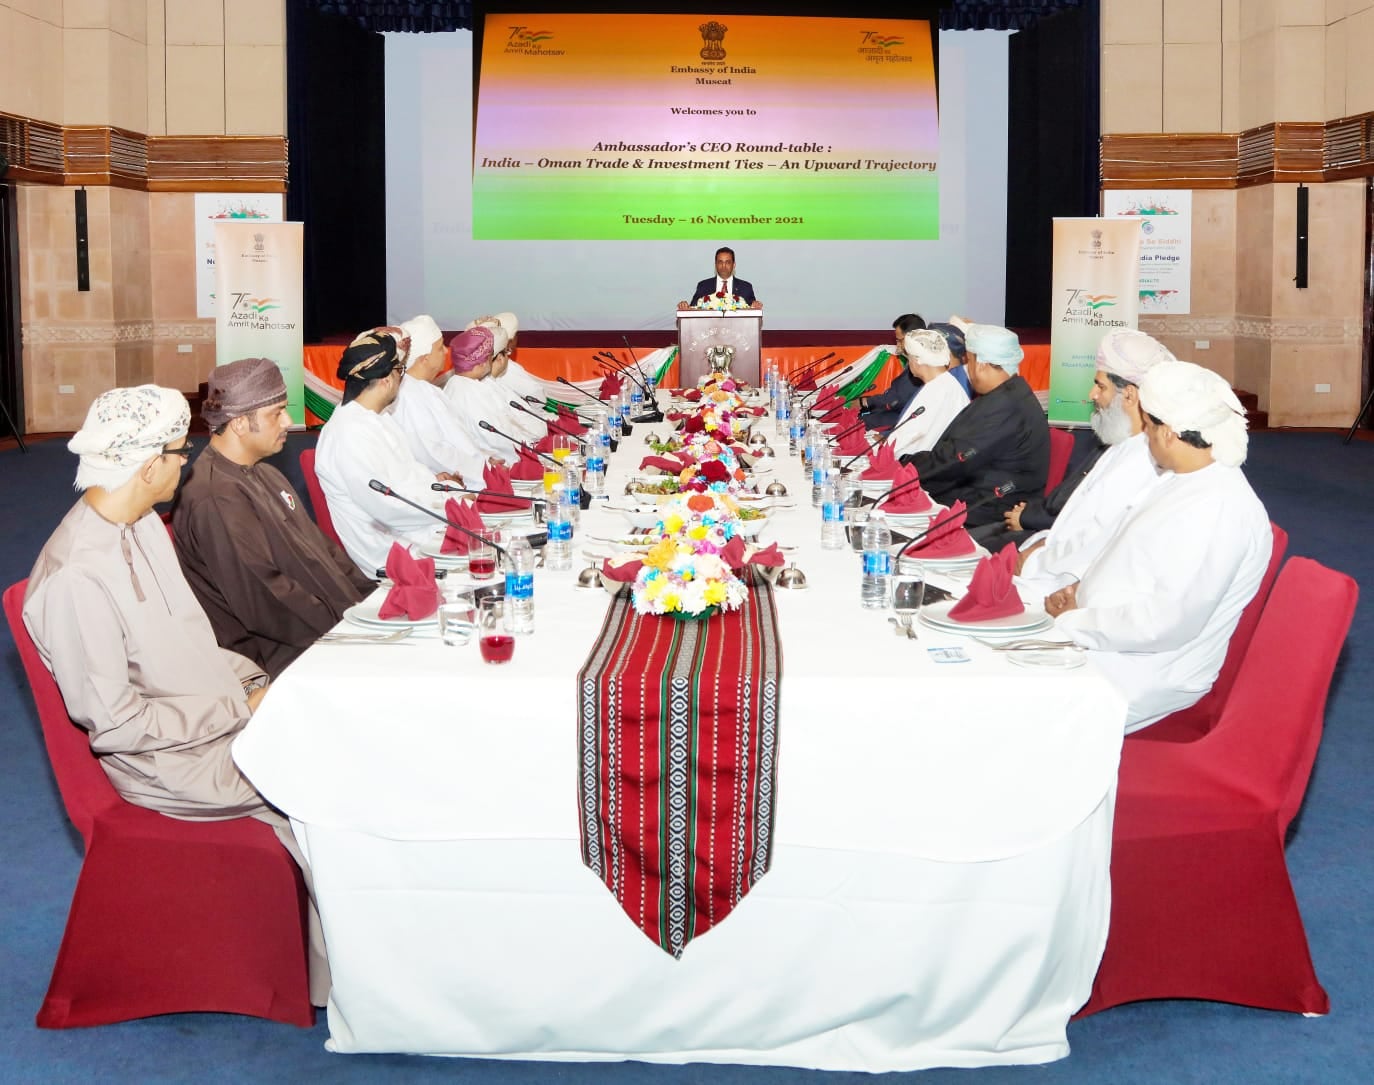 The 2nd Business Roundtable hosted by the Embassy for Omani business leaders